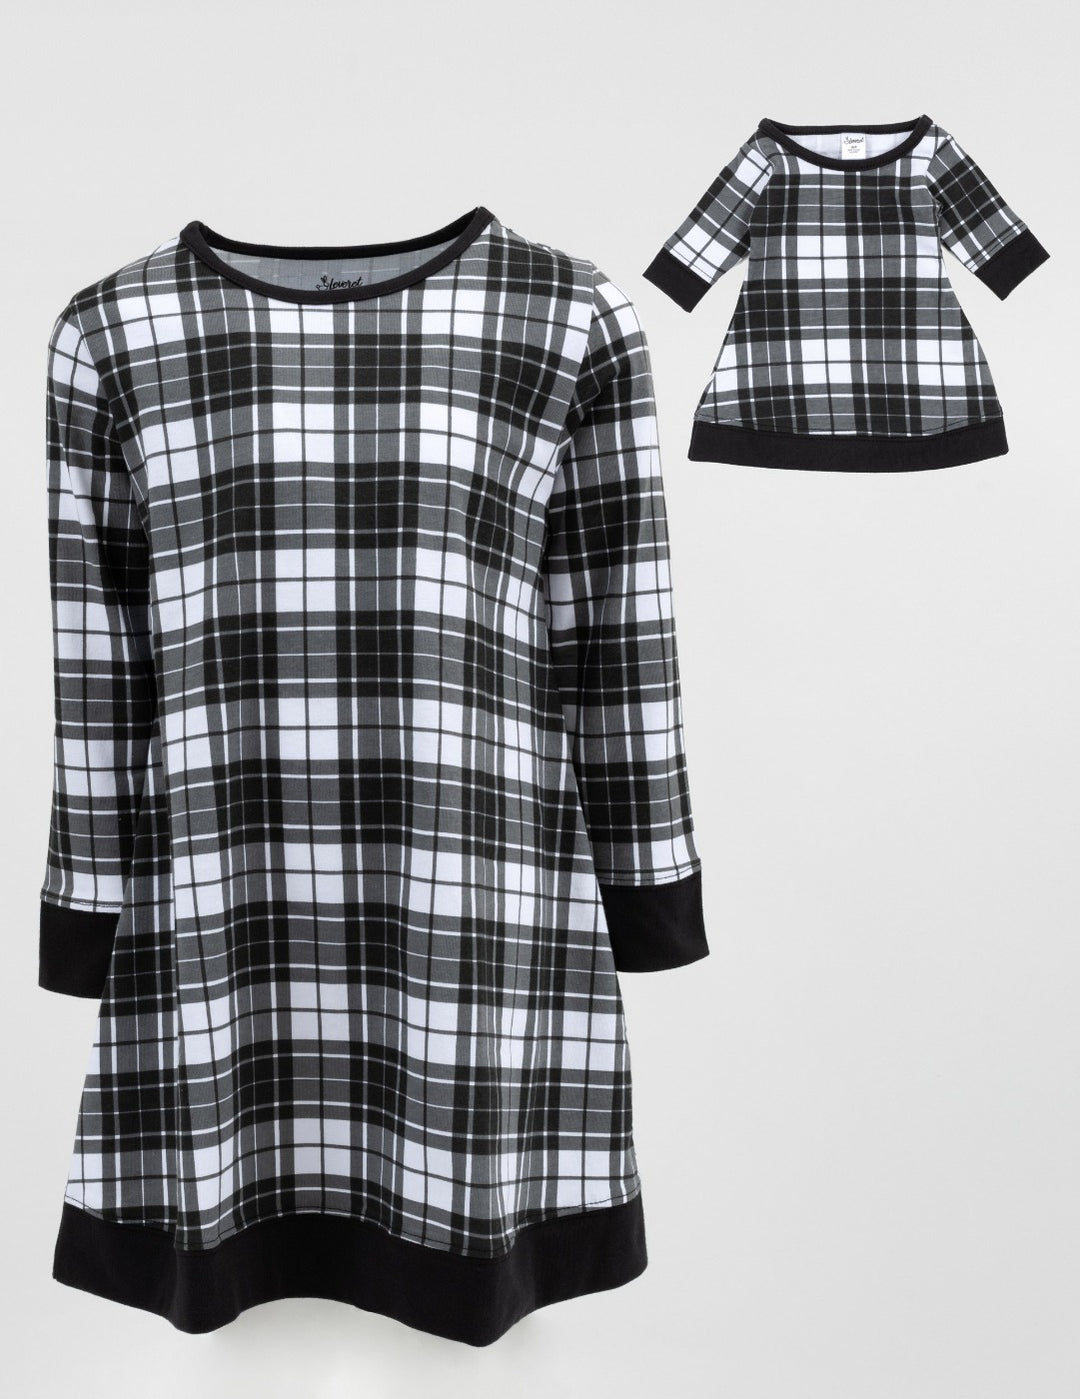 Black and white plaid girl and doll dress